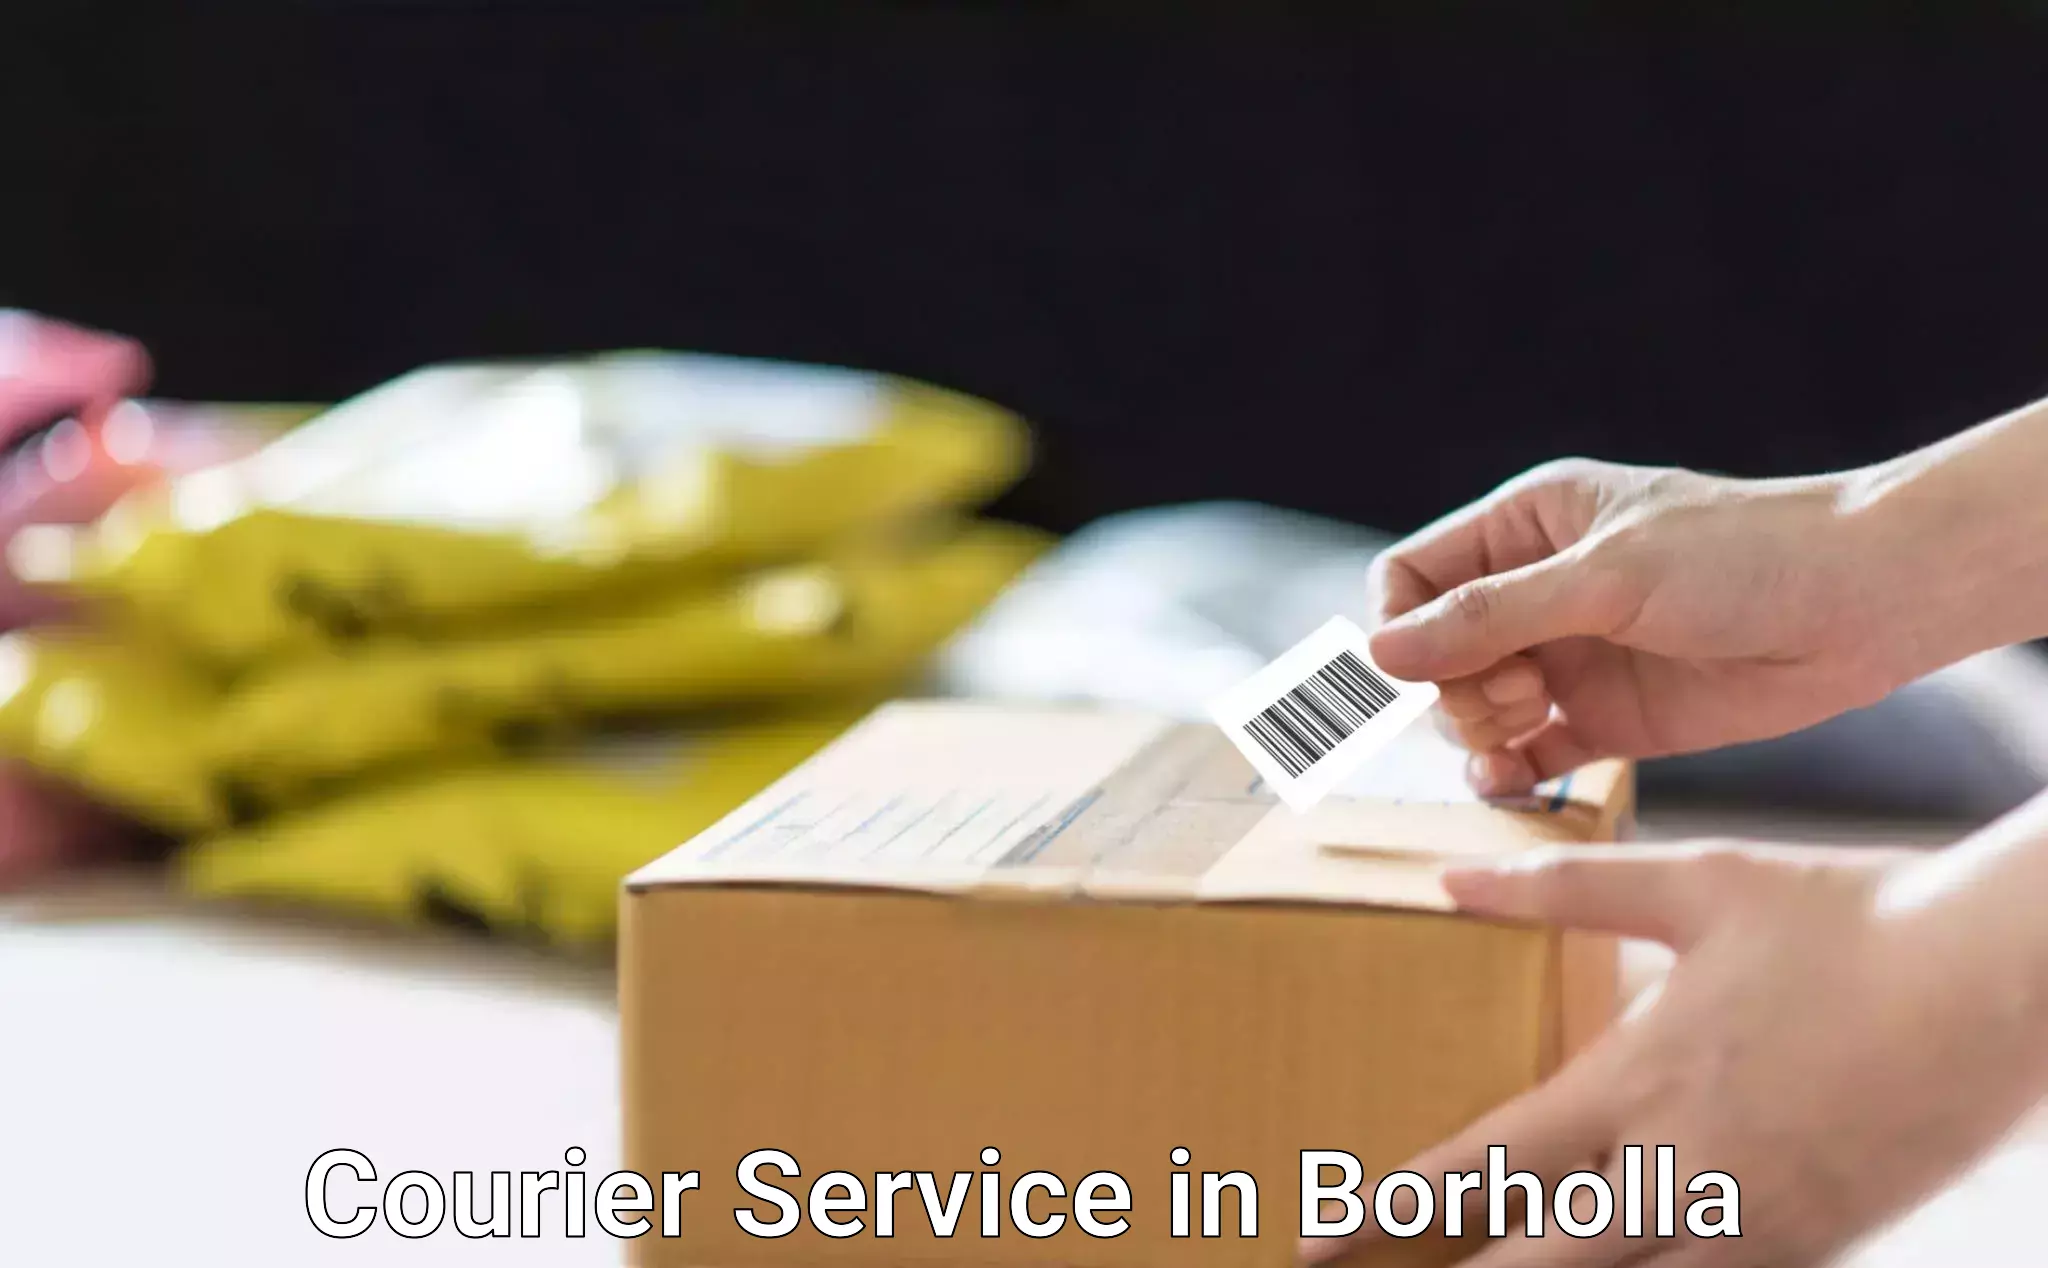 State-of-the-art courier technology in Borholla